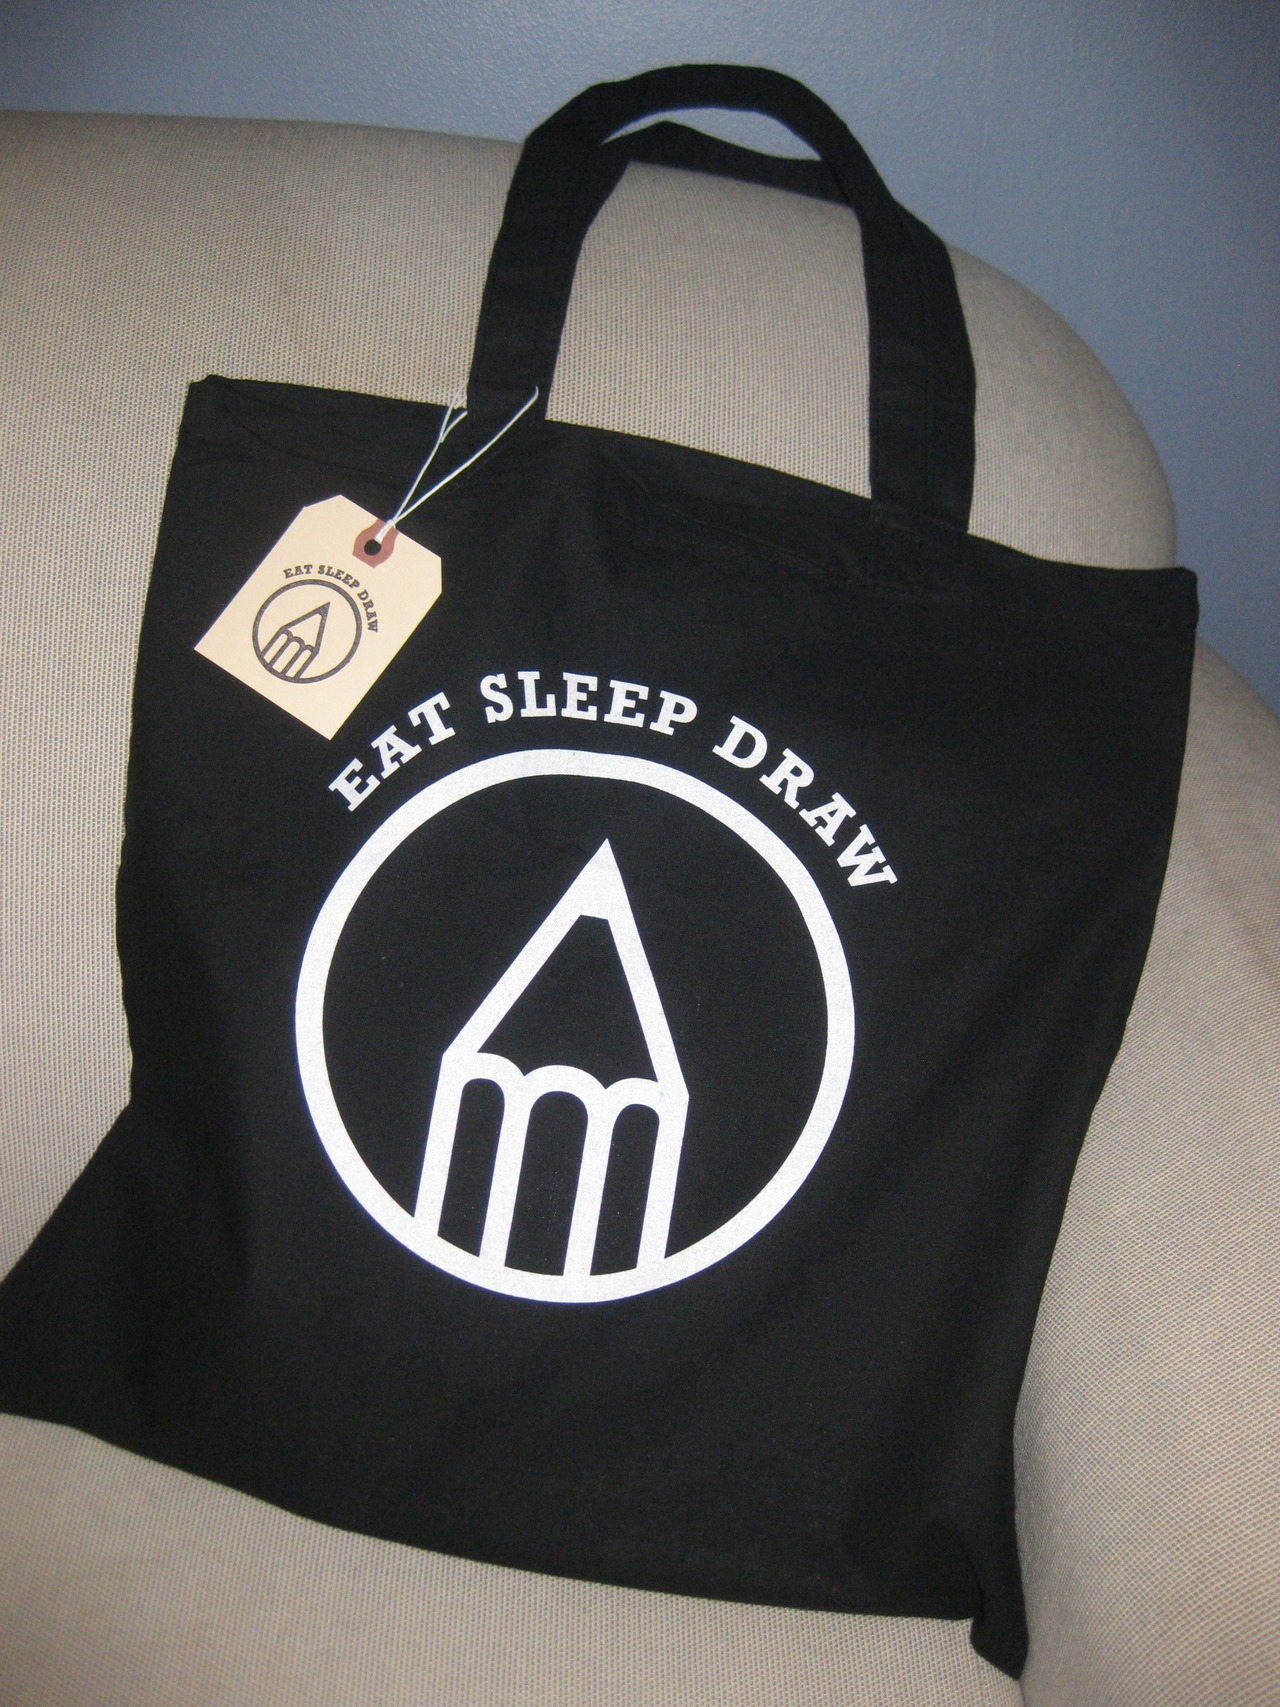 life-is-abstract: My EAT SLEEP DRAW tote arrived today Use promo code tote20 for 20% off your entire order when you buy a tote.  Shop now.